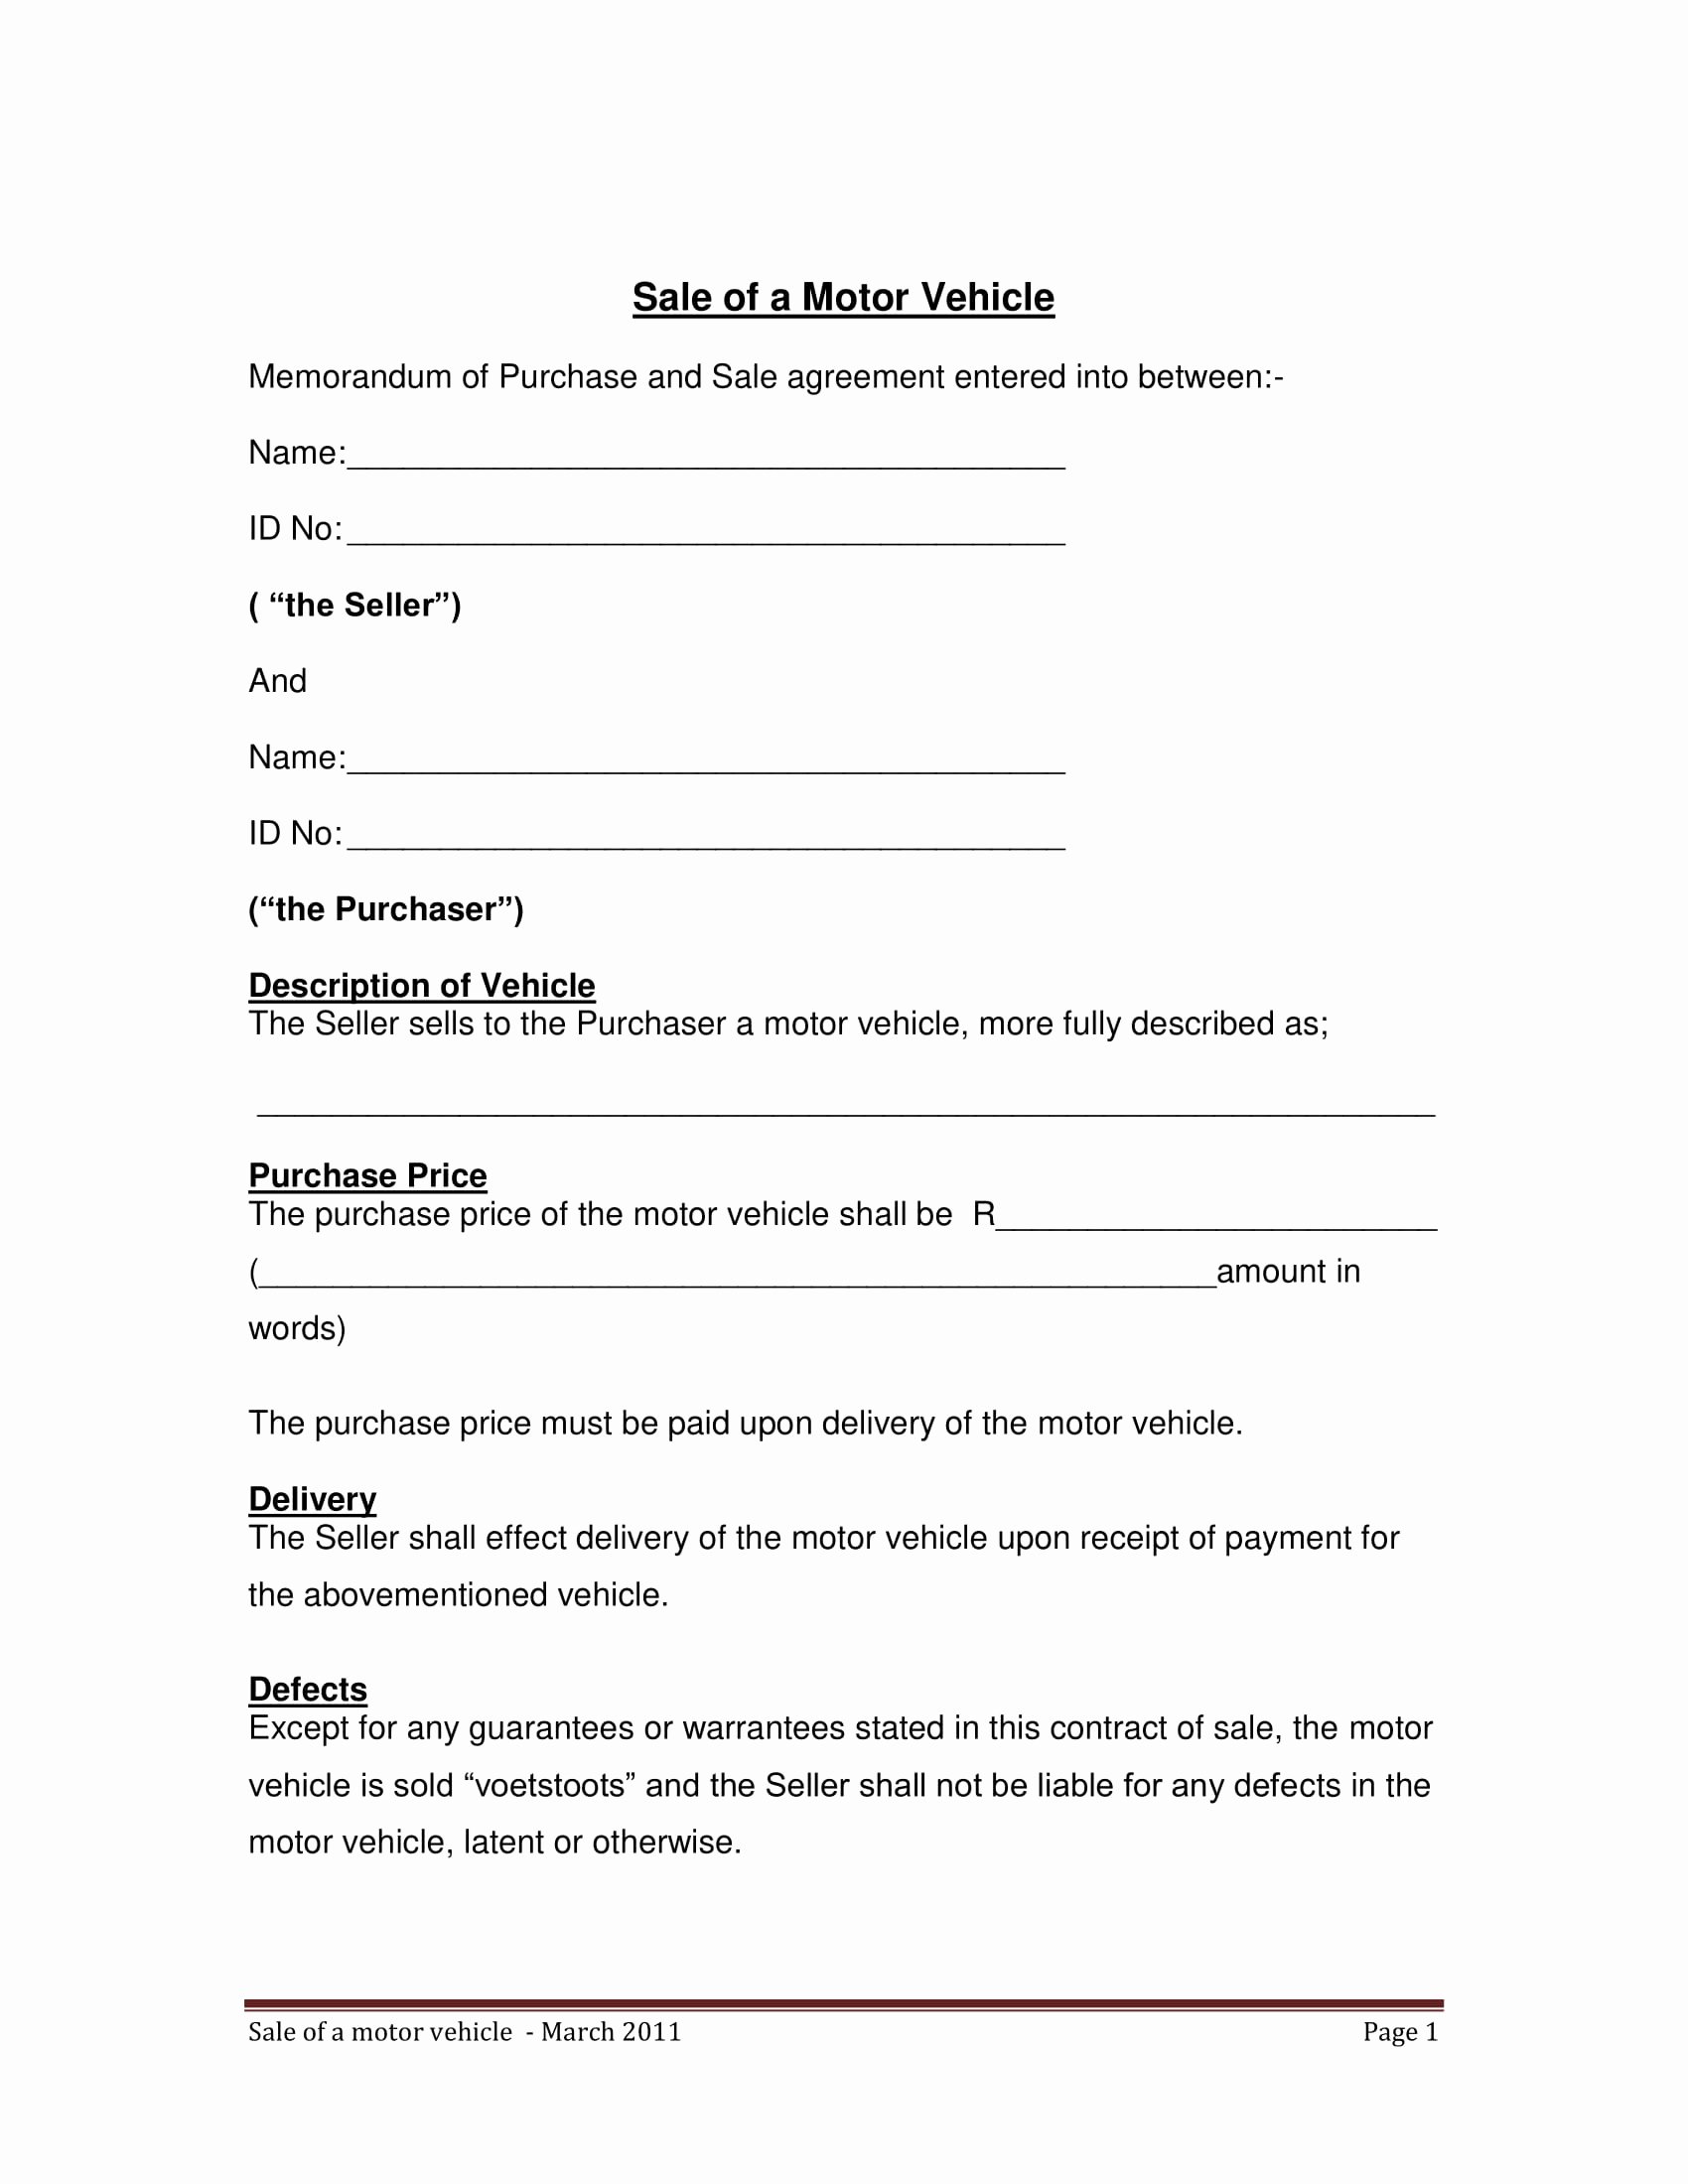 Simple Sales Agreement Template Best Of Free 3 Vehicle Sales Agreement Contract forms In Pdf